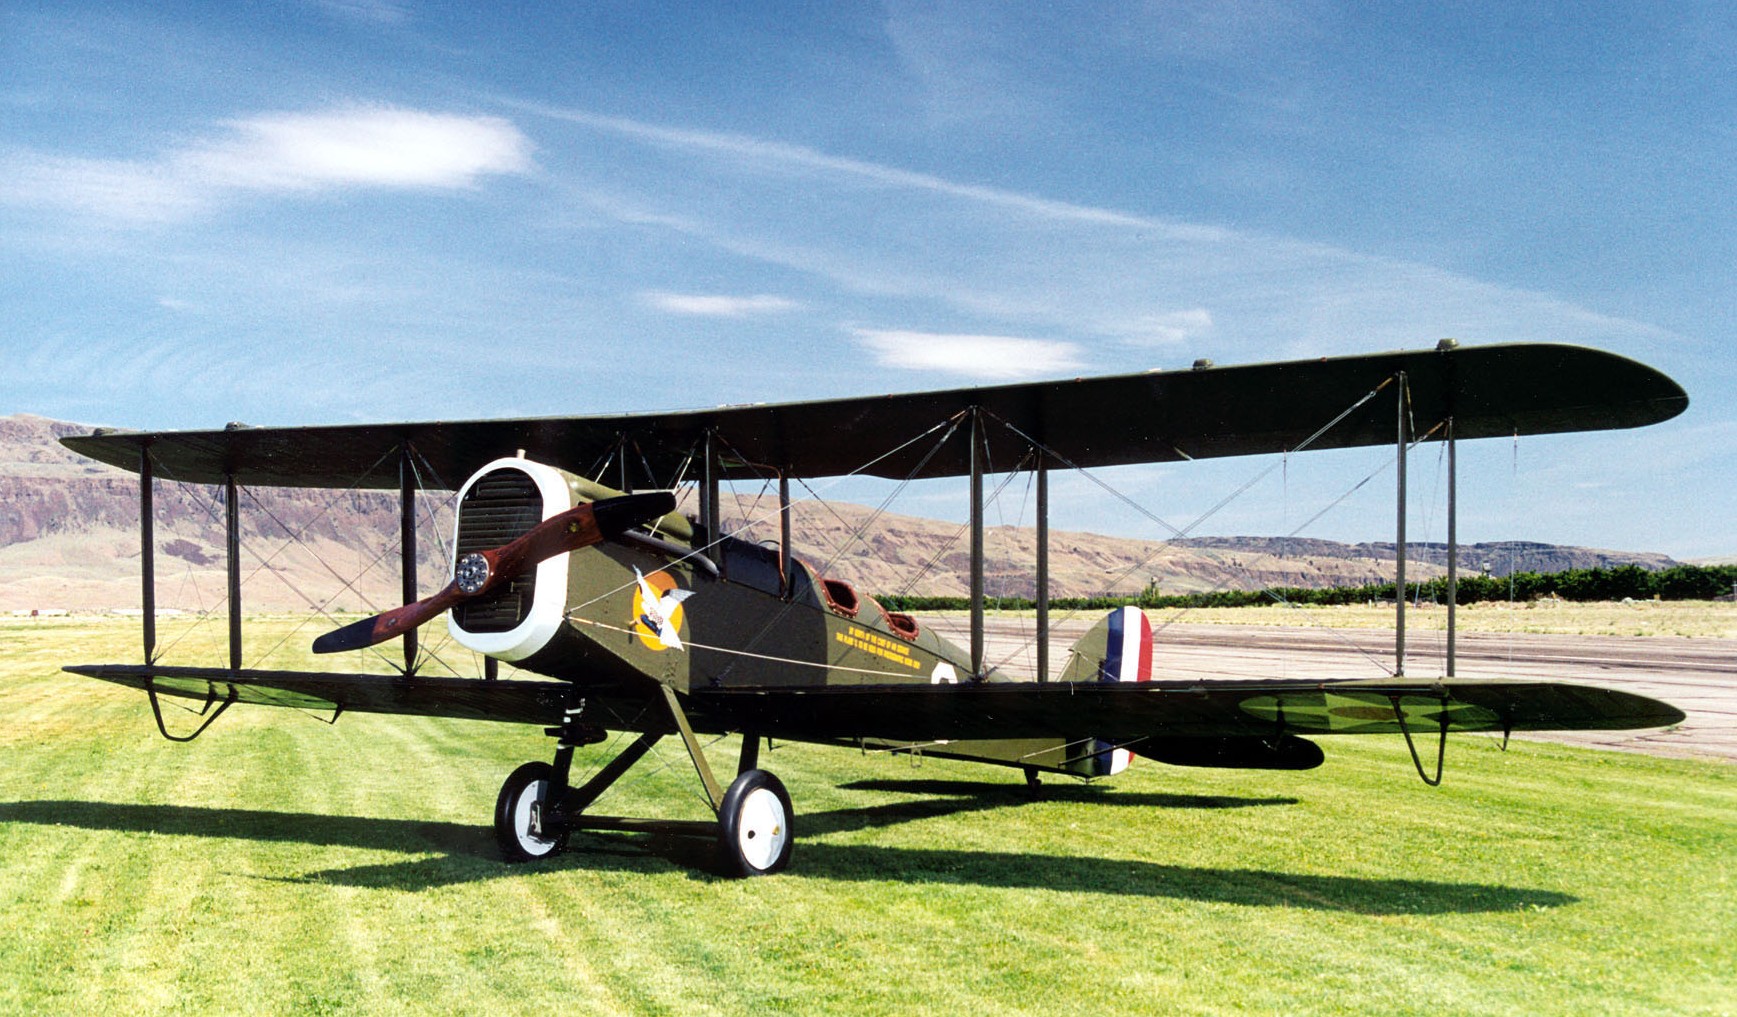 Reproduction of DH-4-S-1, A.S. 22-353, in teh collection of the National Museum of the United States Air Force, Wright-Patterson Air Force Base, Ohio. (U.S. Air Force)